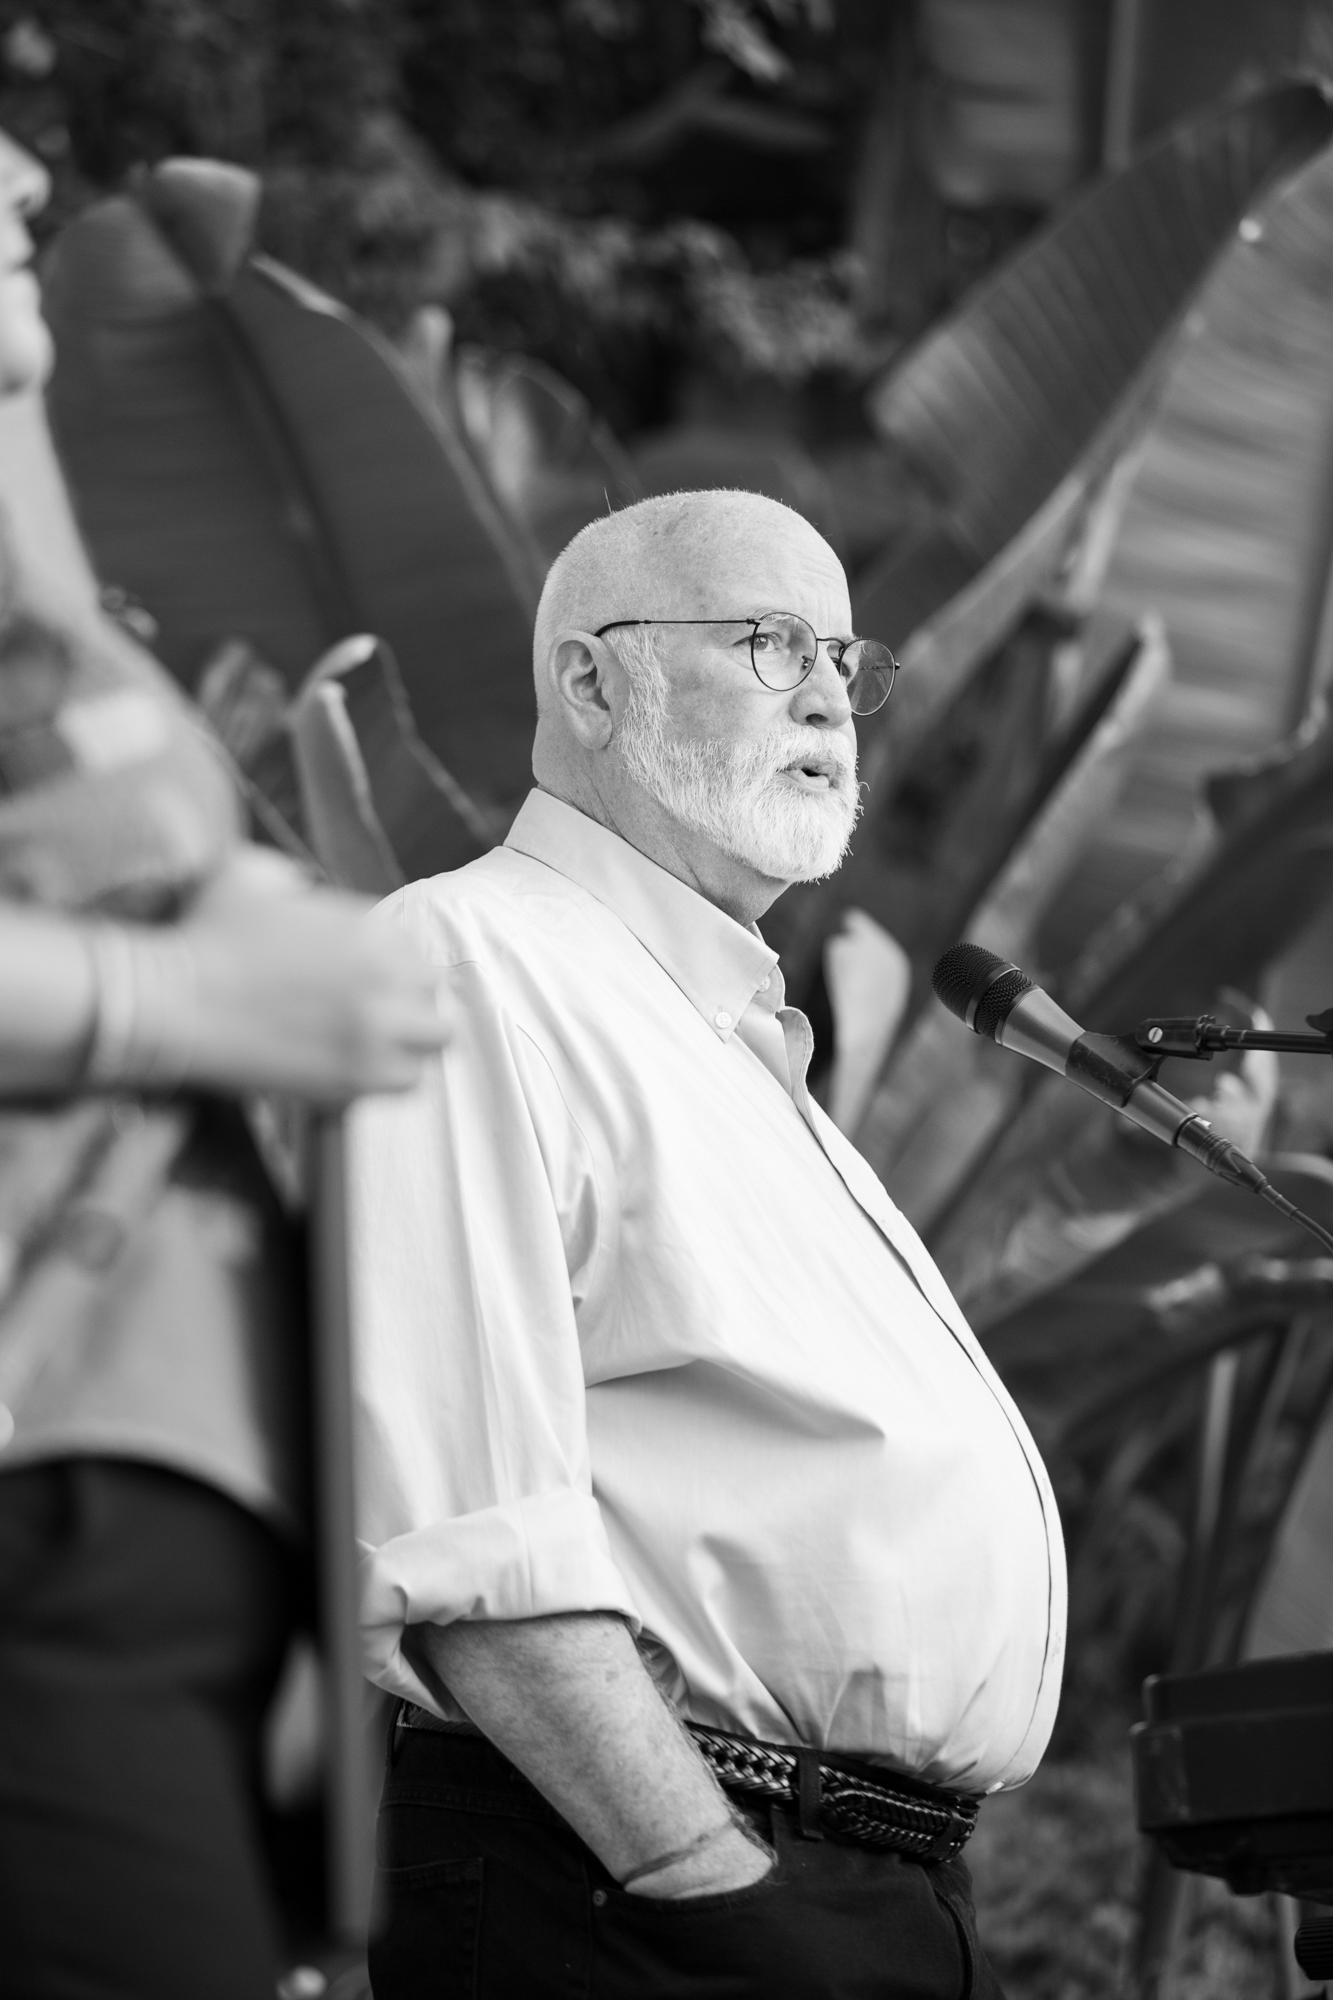 Father Boyle from Homeboy Industries speaks at Los Angeles fundraiser